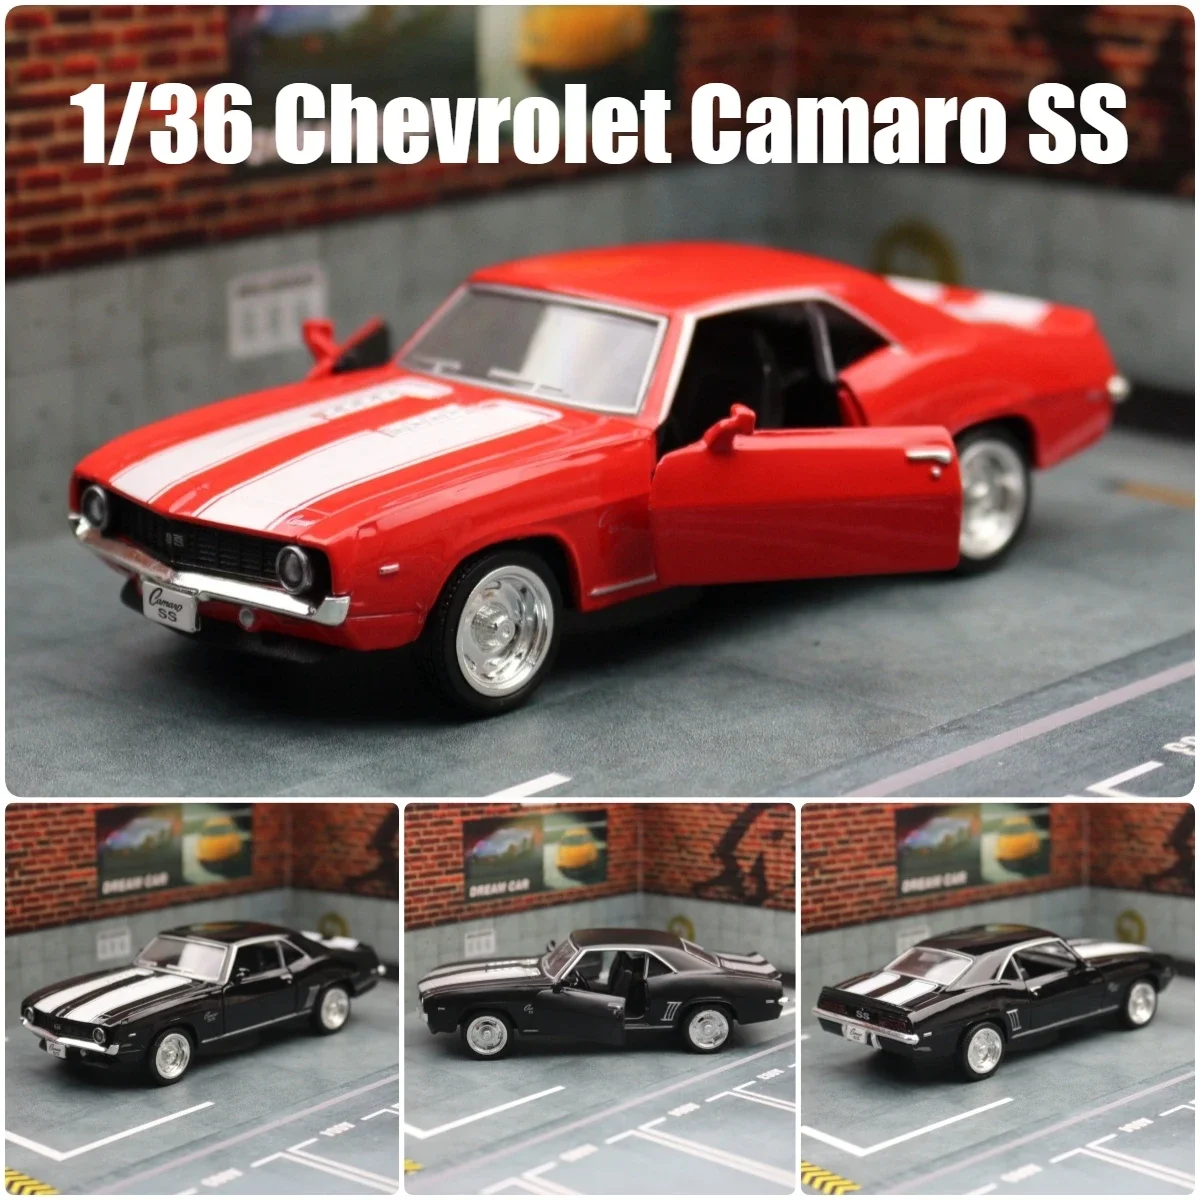 

1:36 Chevrolet Camaro SS Vintage Toy Car Model For Children RMZ CiTY Diecast Vehicle Miniature Pull Back Collection Gift Kid Boy